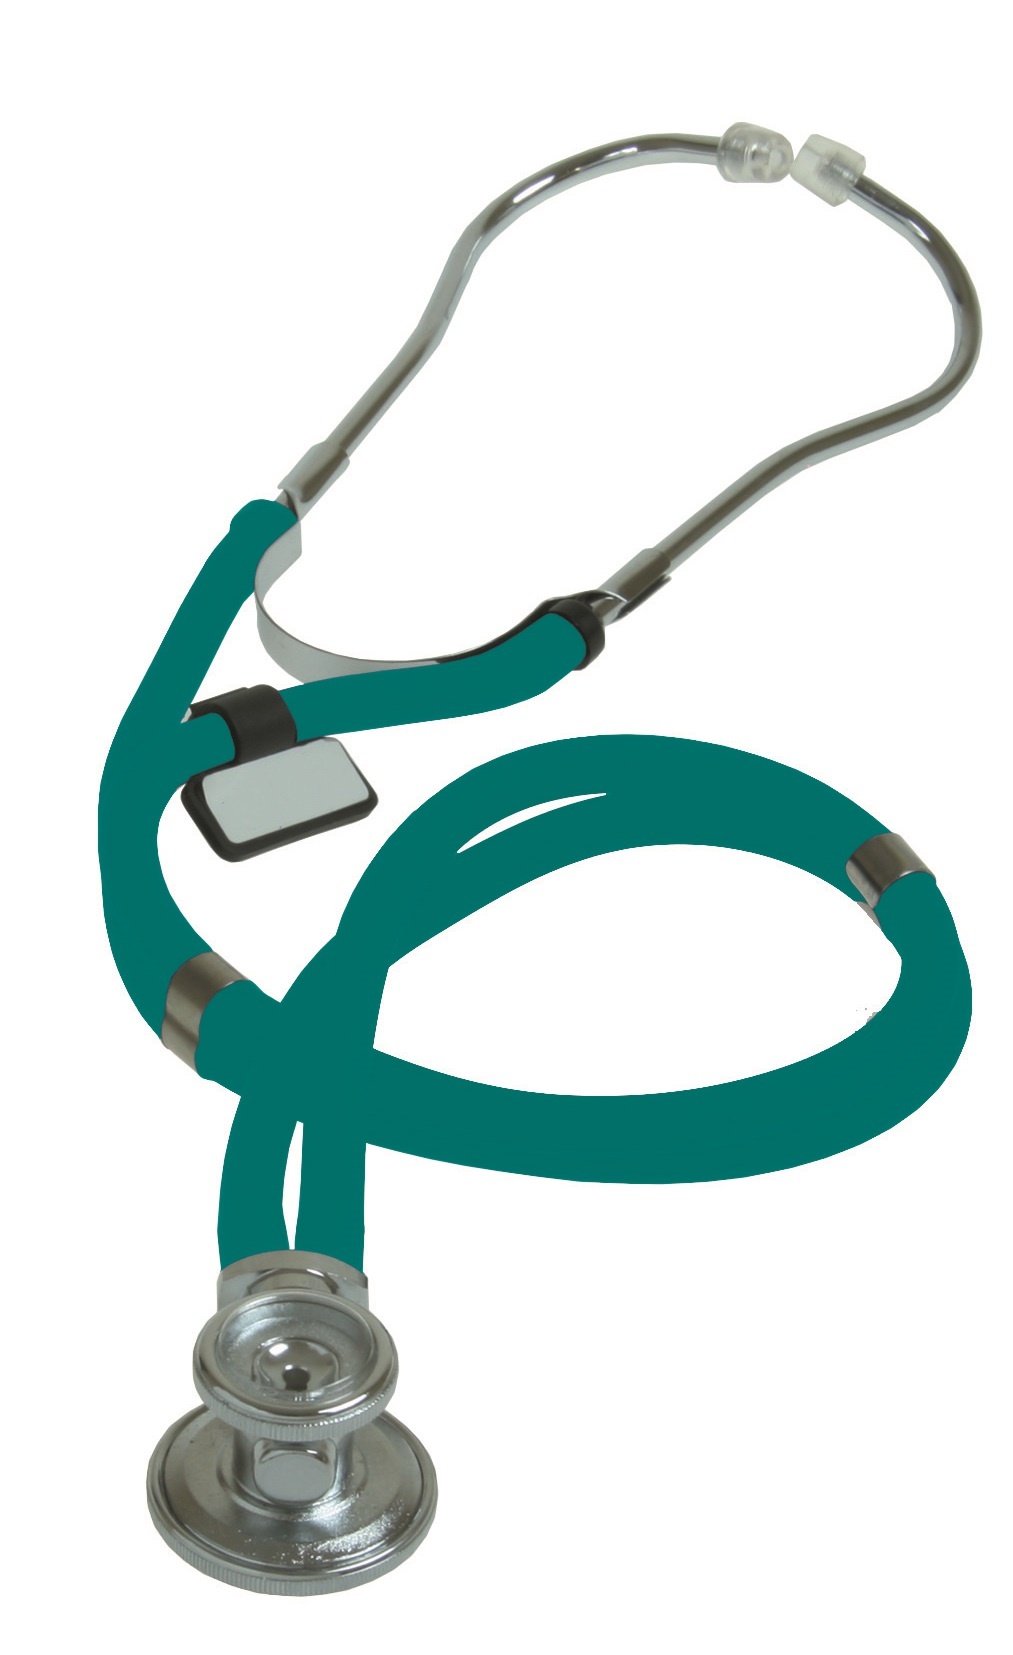 Liberty Sprague Stethoscope Clam Shell - Teal image 0